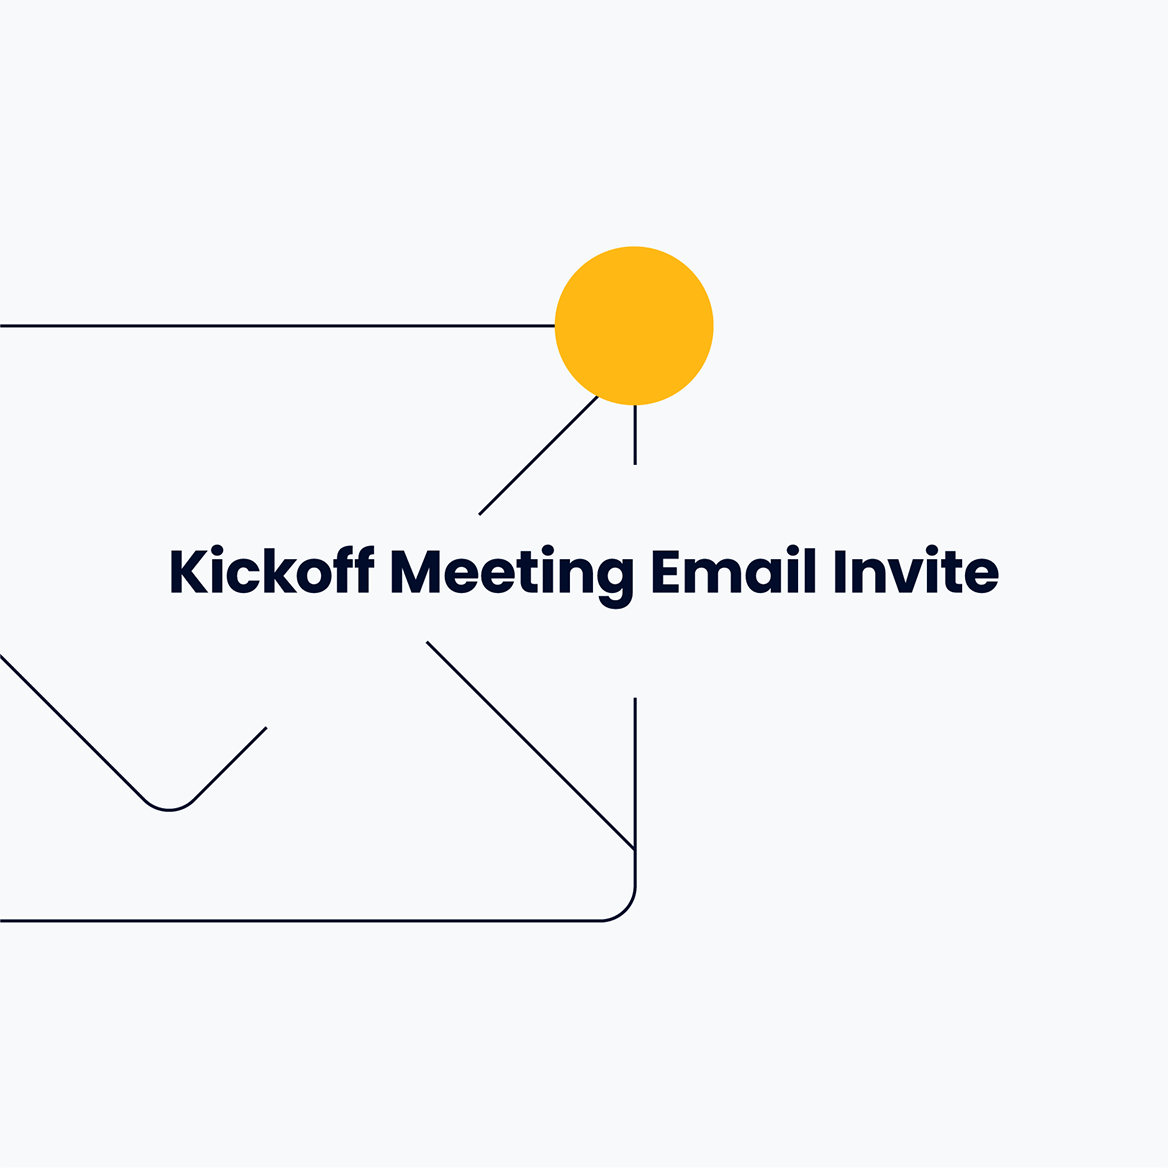 Templates-Kickoff Meeting Email Invite